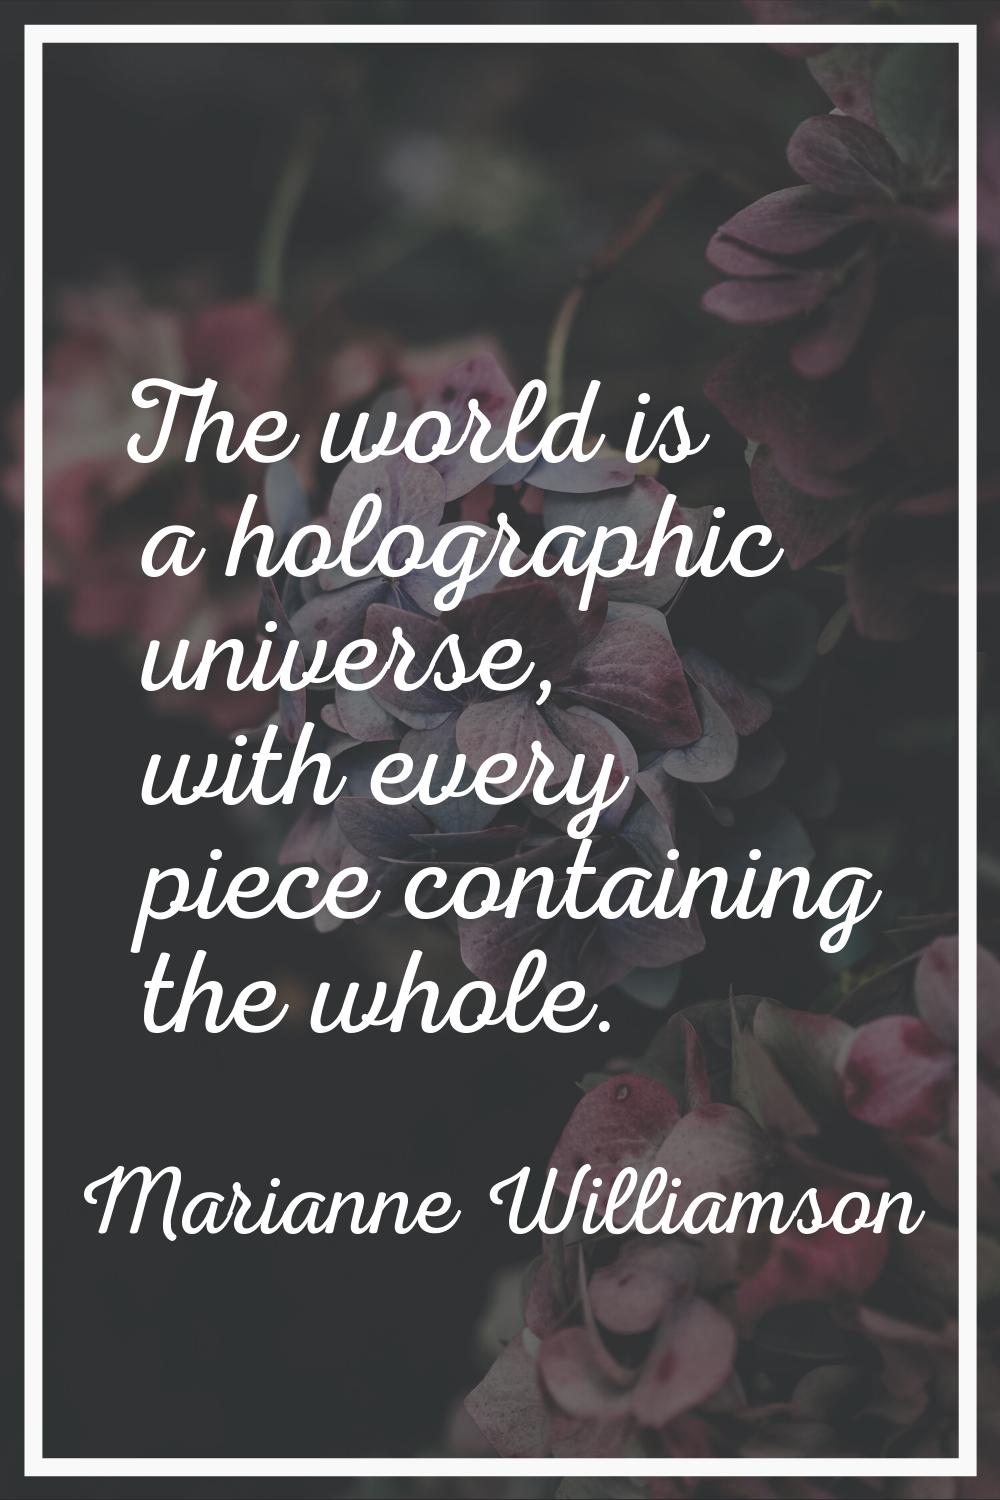 The world is a holographic universe, with every piece containing the whole.